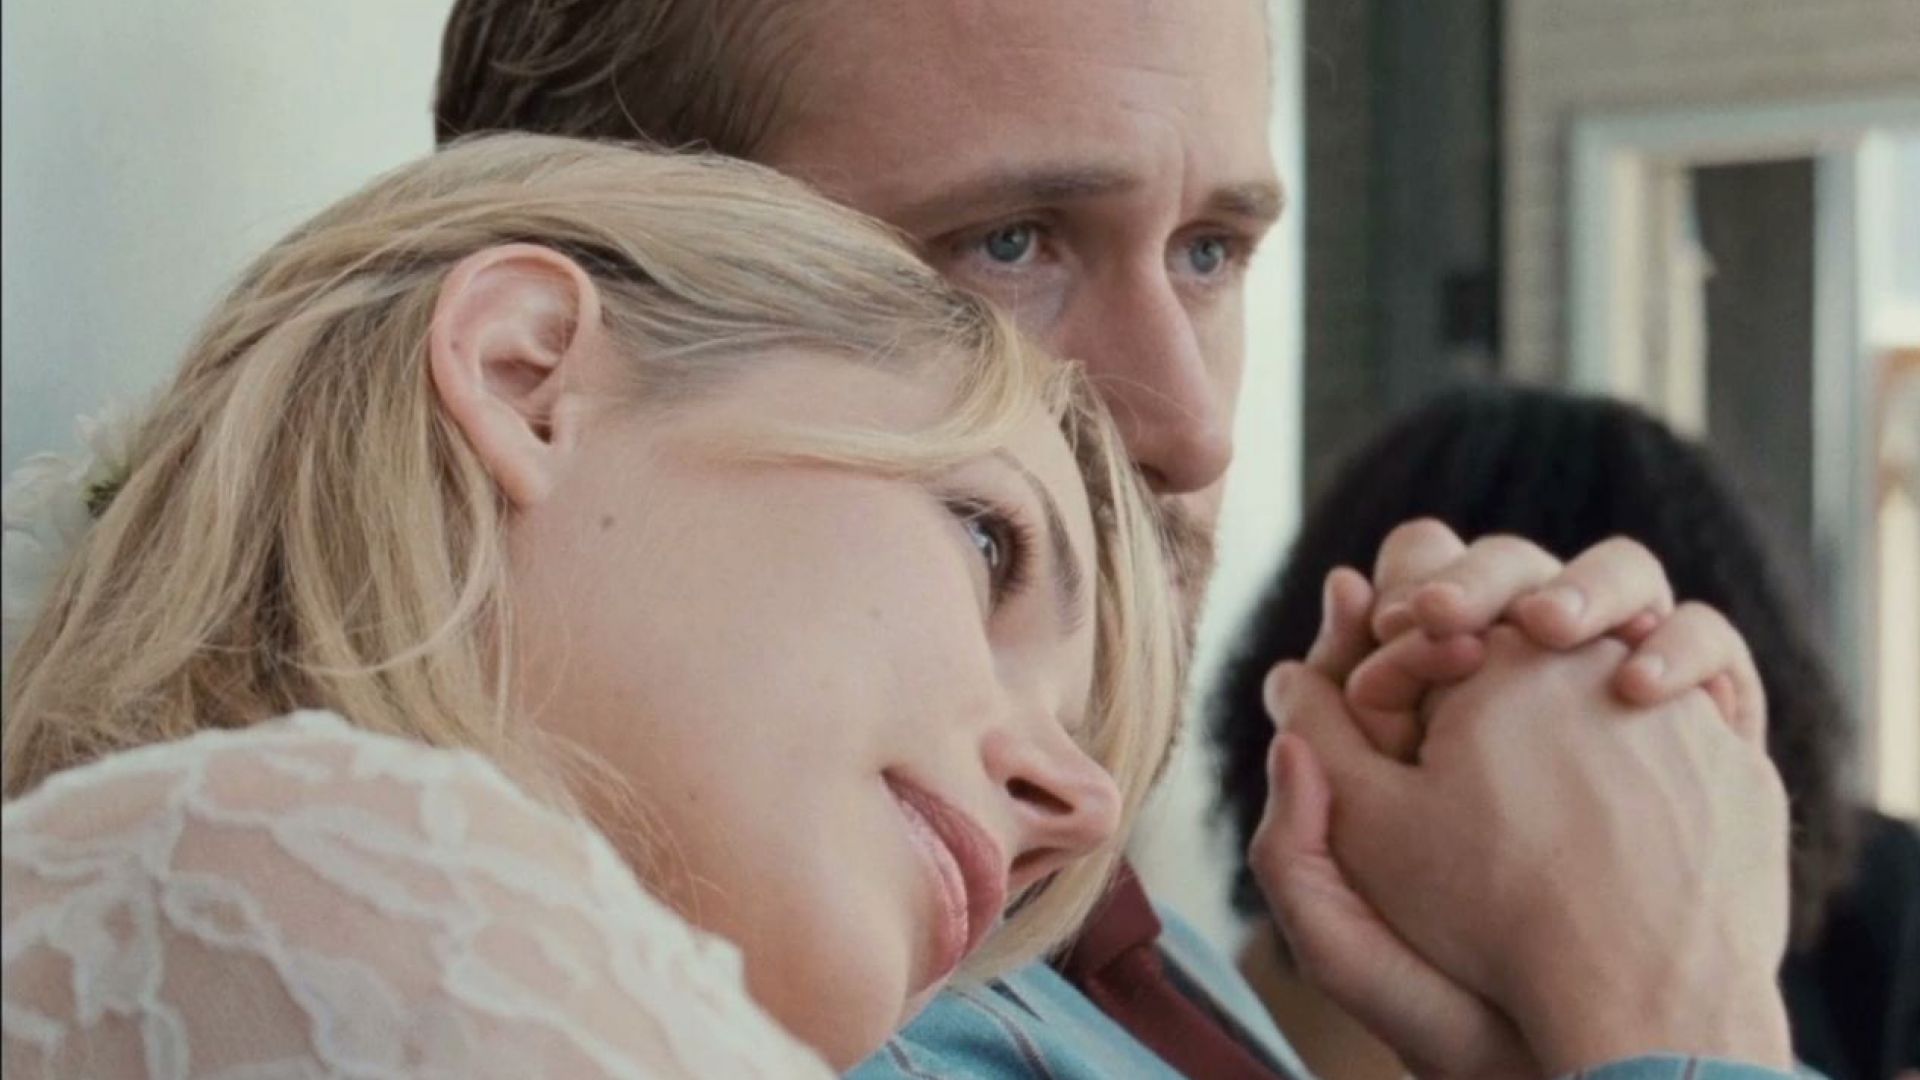 Blue Valentine: What Are You Thinking About